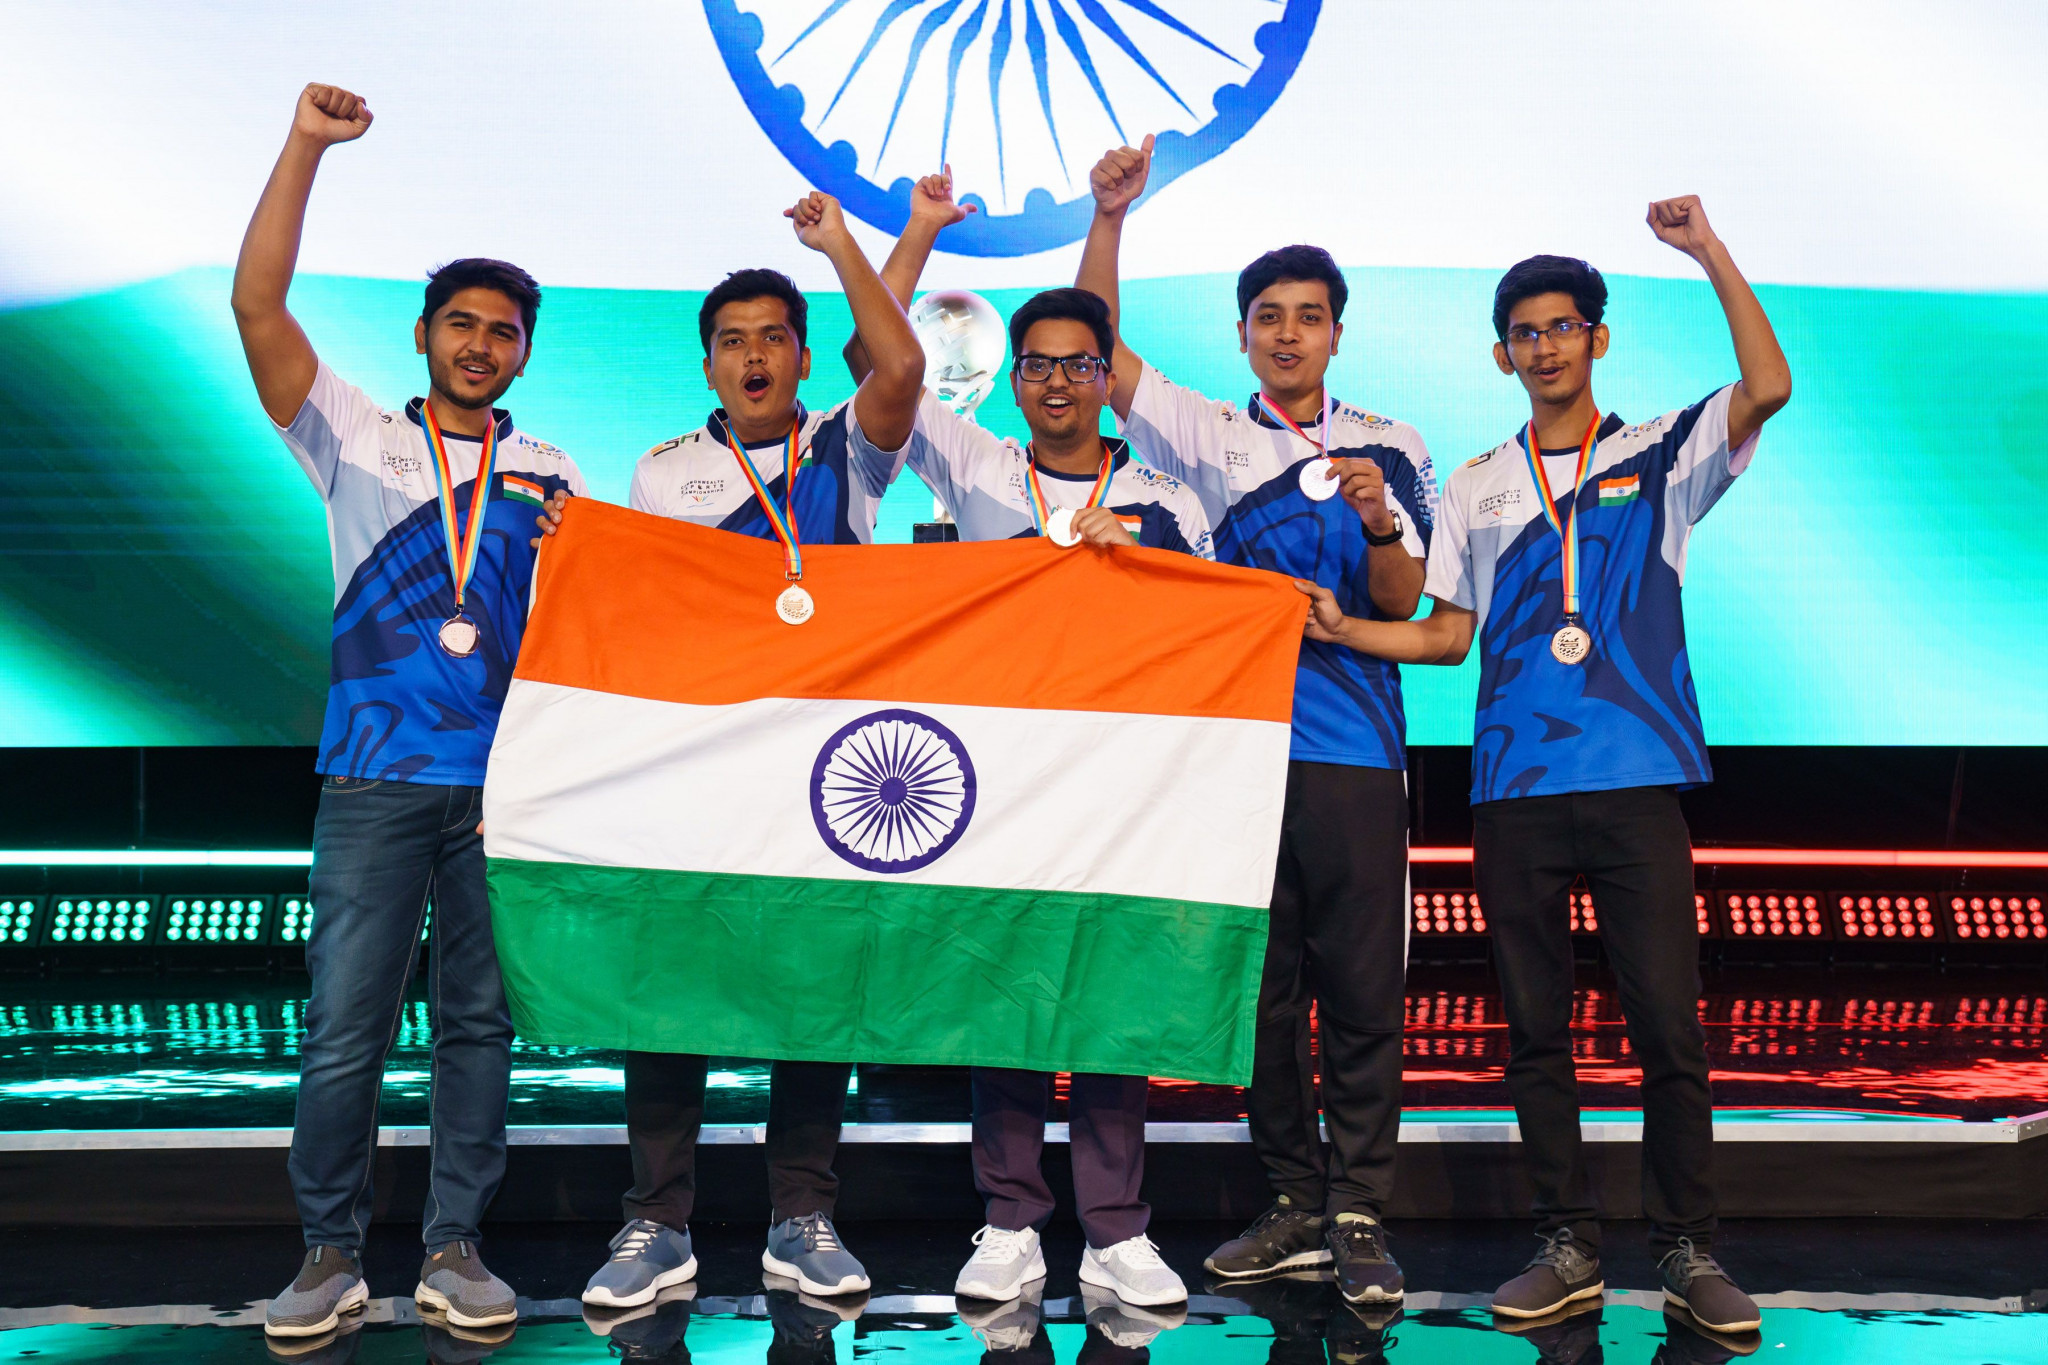 India's DOTA 2 open team got their nation on the medal table following their display in the bronze decider ©GEF